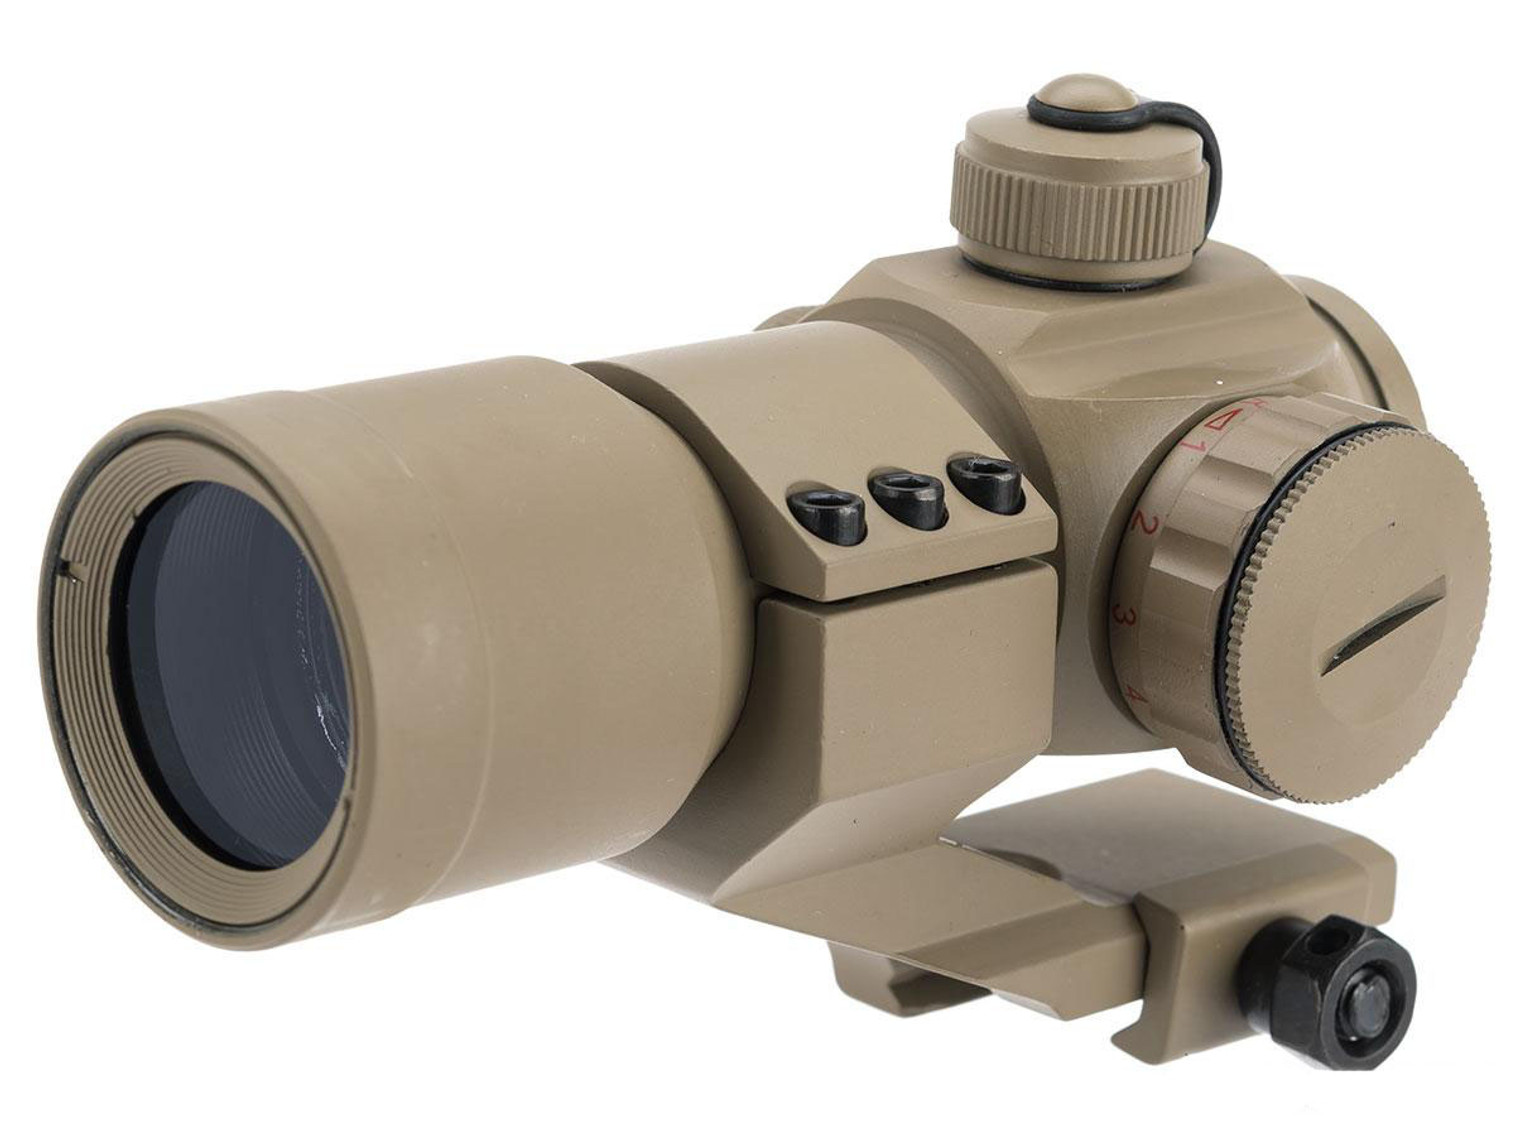 UFC HD30M3 1X30 Red Dot Sight with Cantilever Mount (Color: Tan)